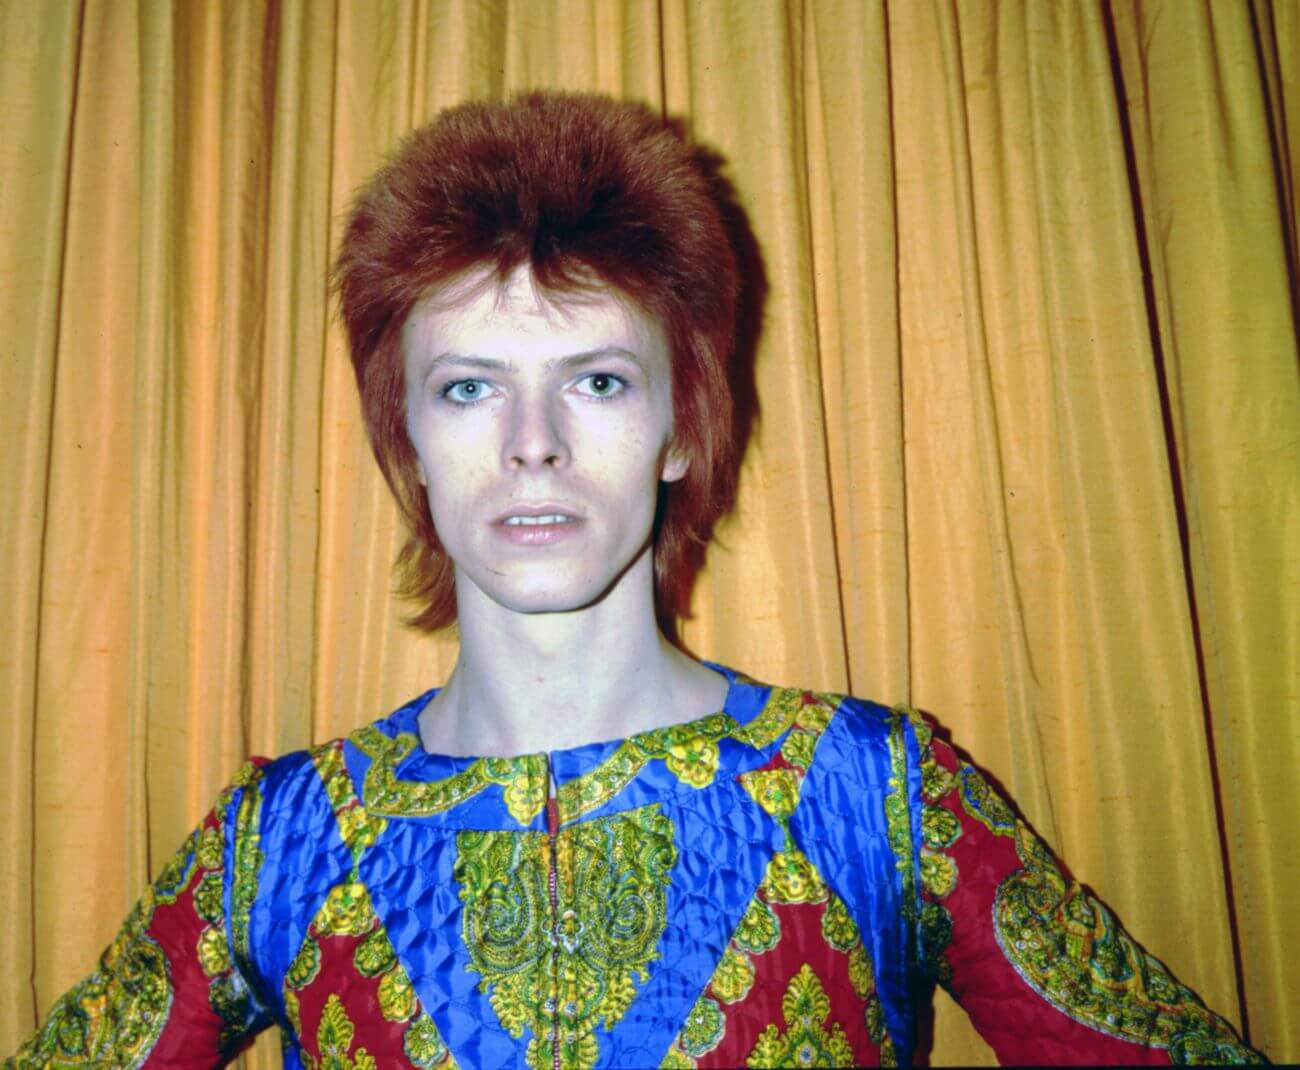 David Bowie wears a patterned shirt and stands with his hands on his hips.